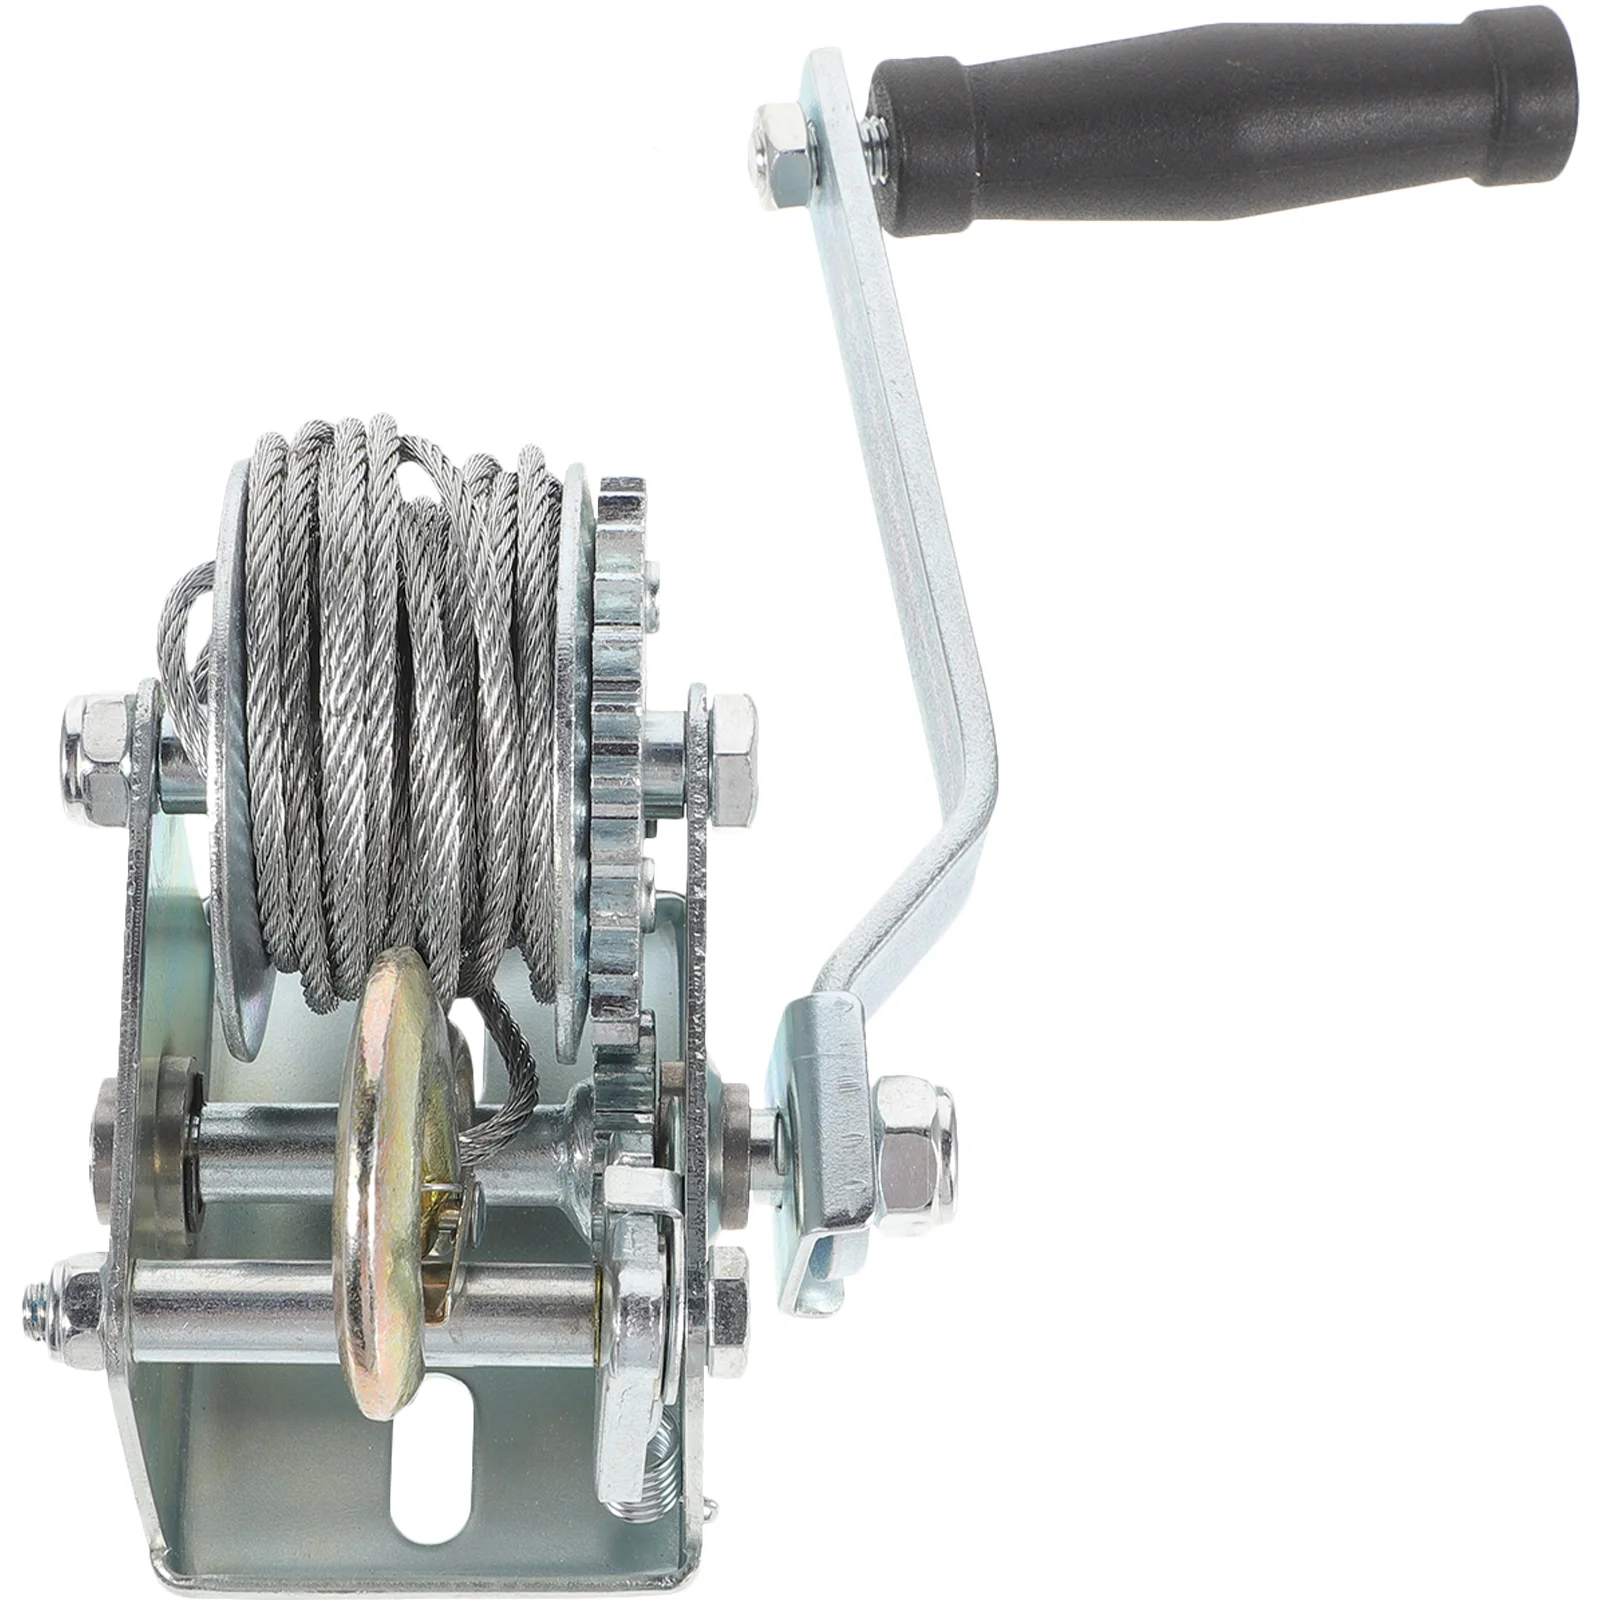 

500lb Boat Winch Hand Crank Trailer Marine Manual Mini Towing Loading Gear Ratchet Winches